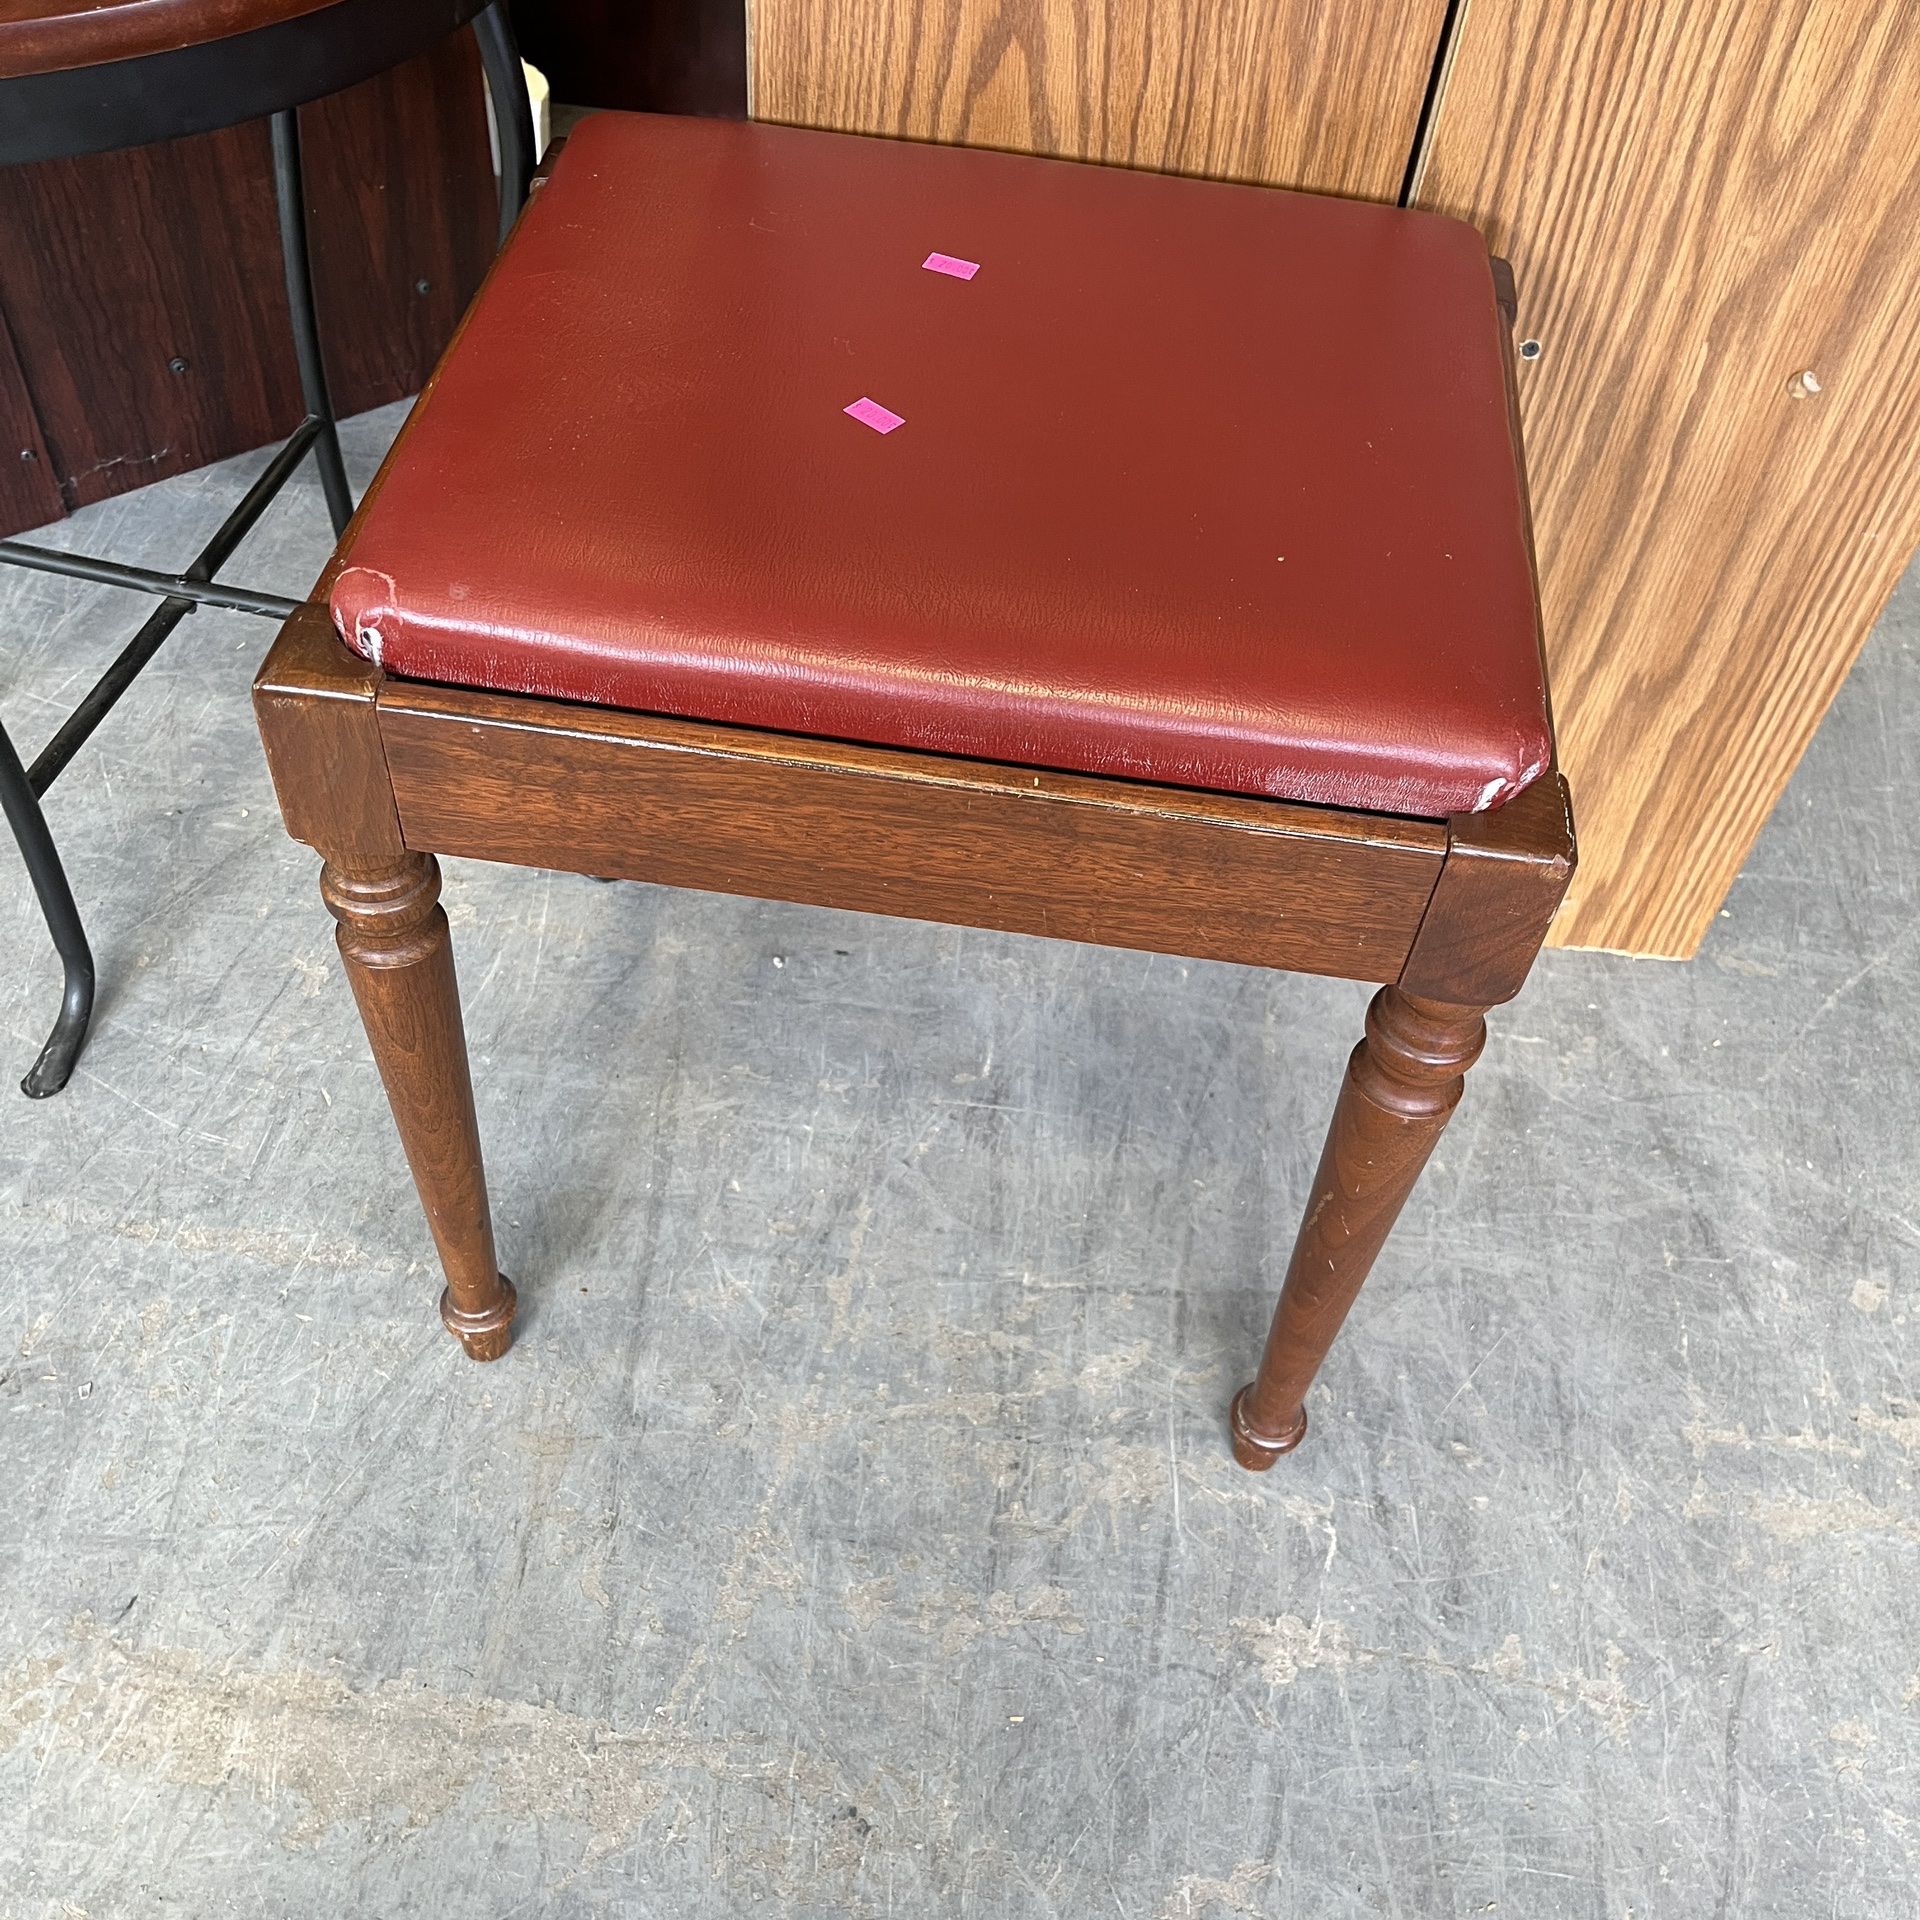 Small Wood Piano Or Sewing Bench Seat (in Store) 